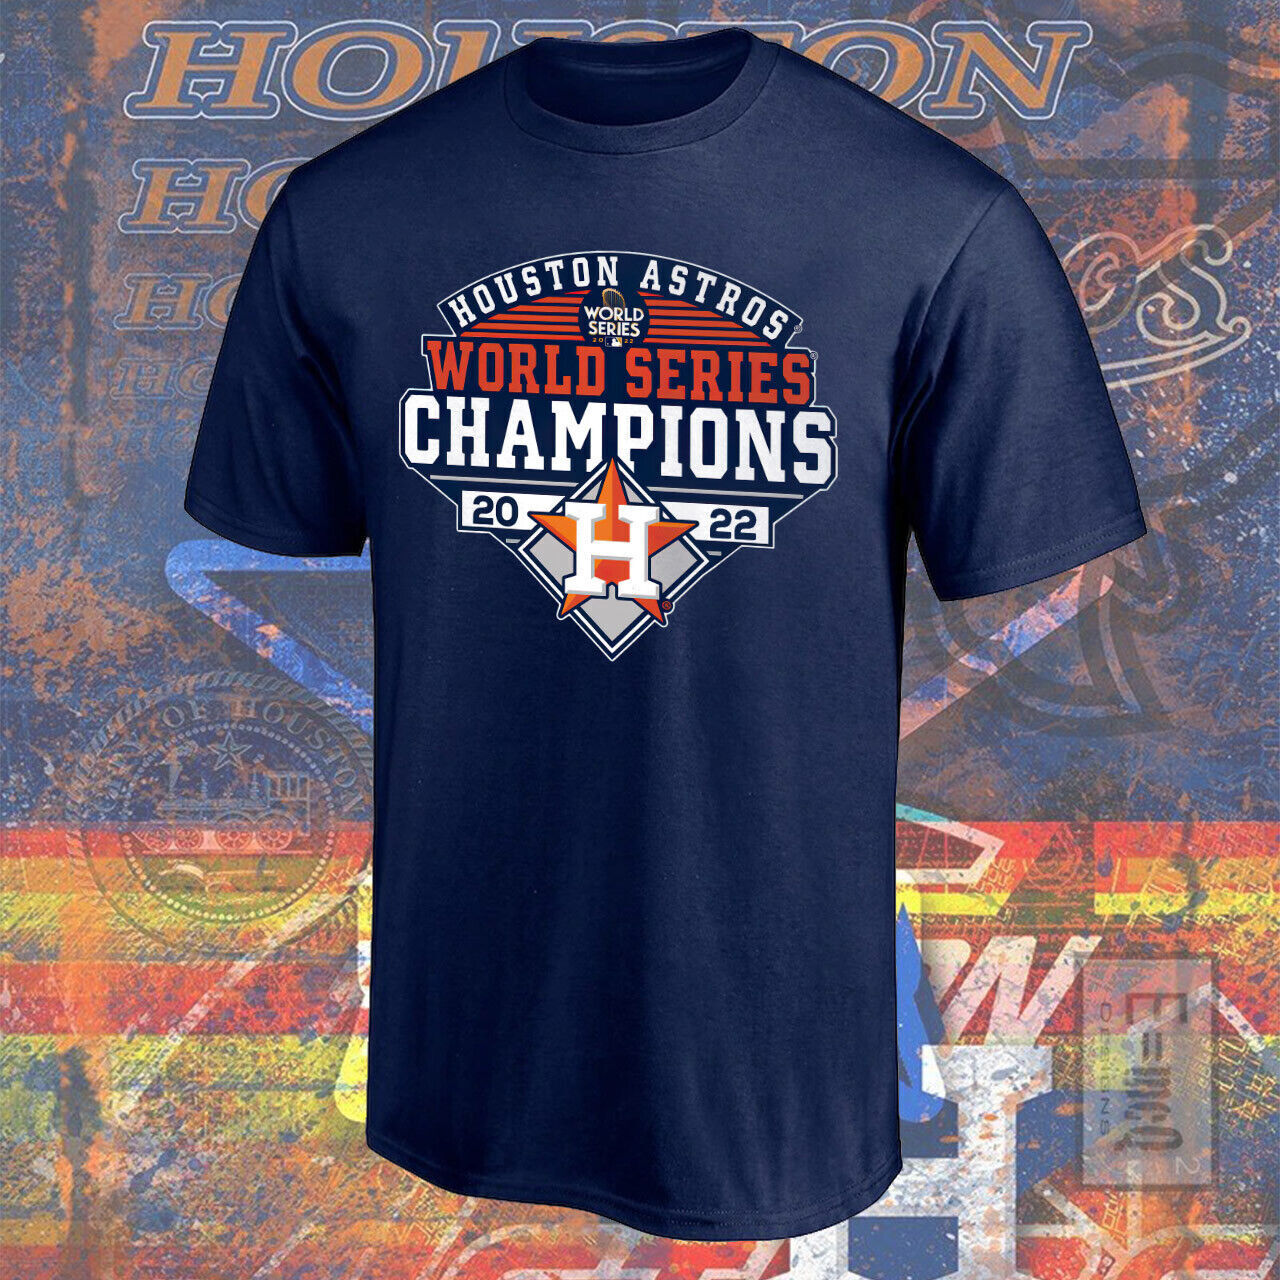 Houston Astros 2022 T-shirt Finals Baseball Team Champs Unisex Gift Fan S-3xl Full Size Up To 5xl